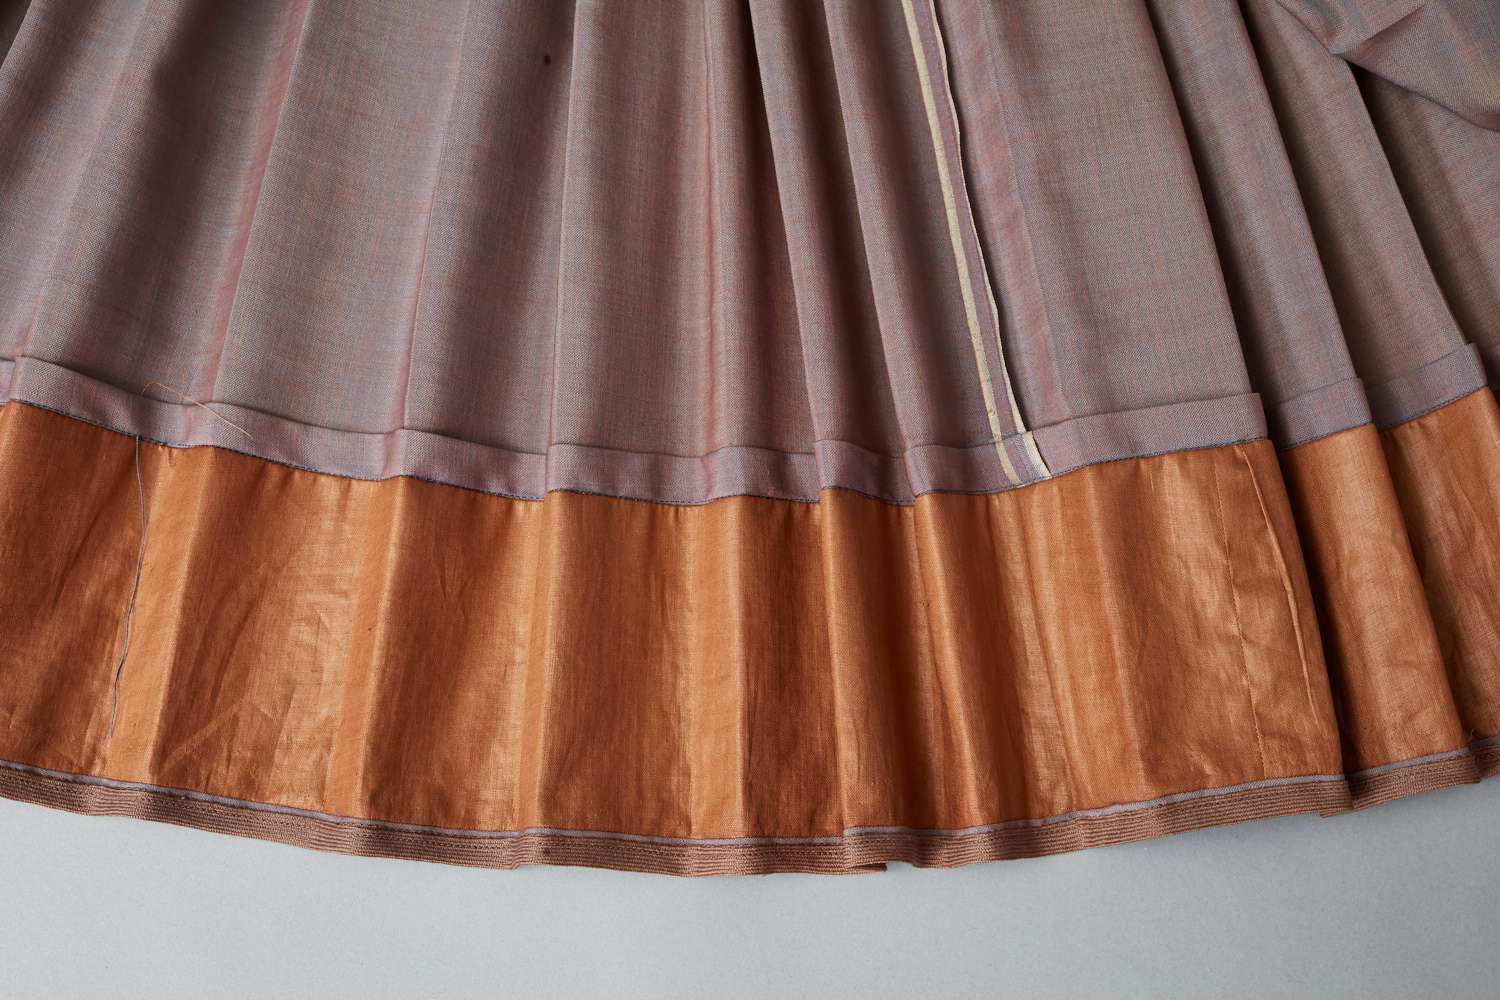 A grey and orange skirt hanging on a wall.